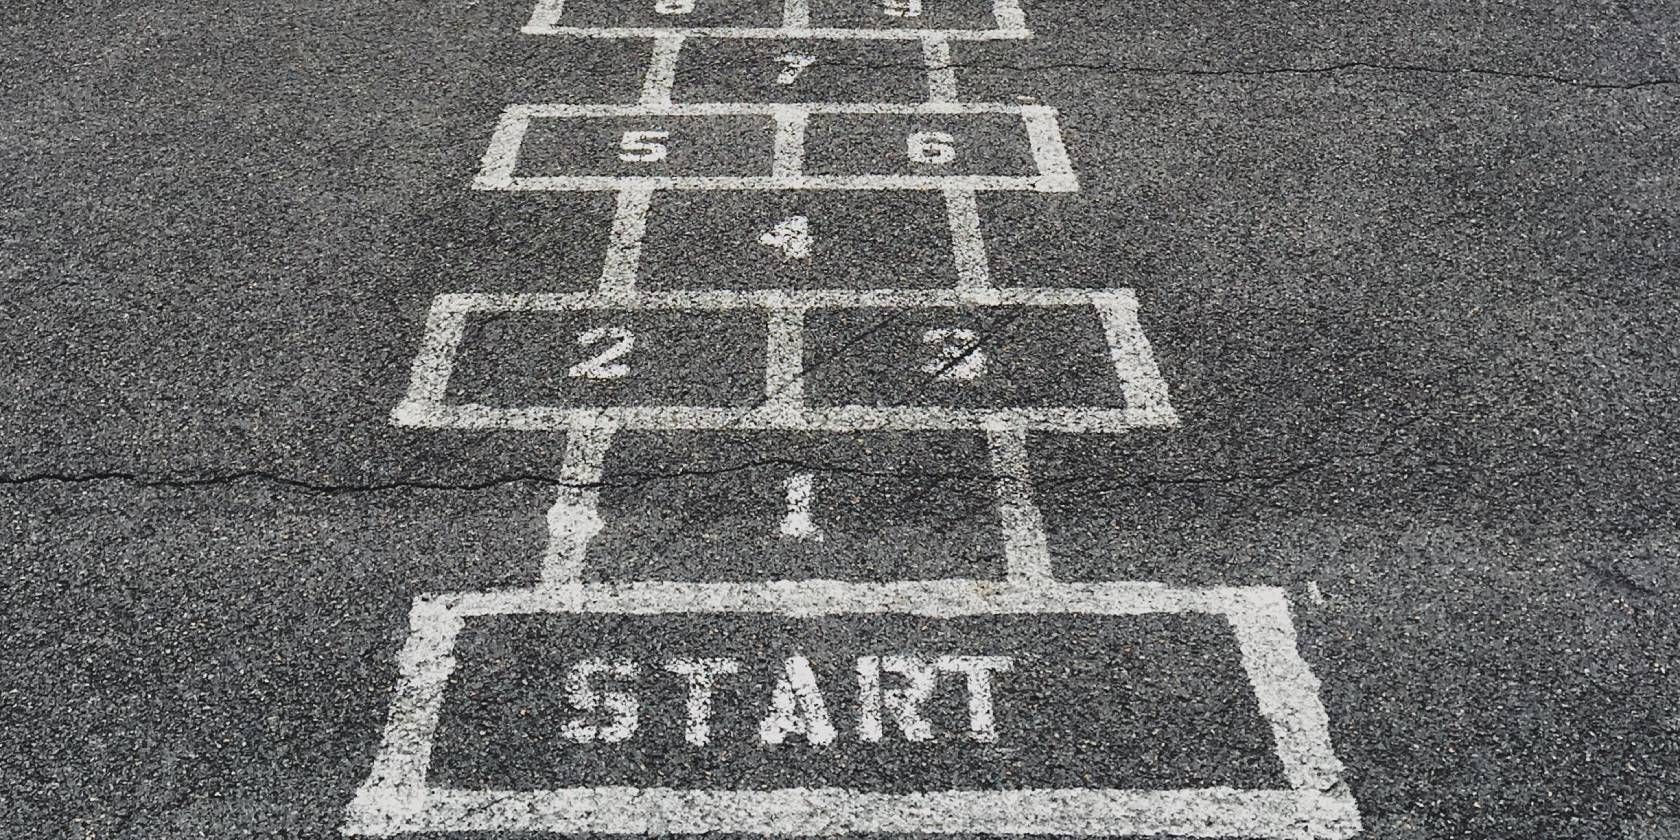 Photo showing a hopscotch painting on a road 